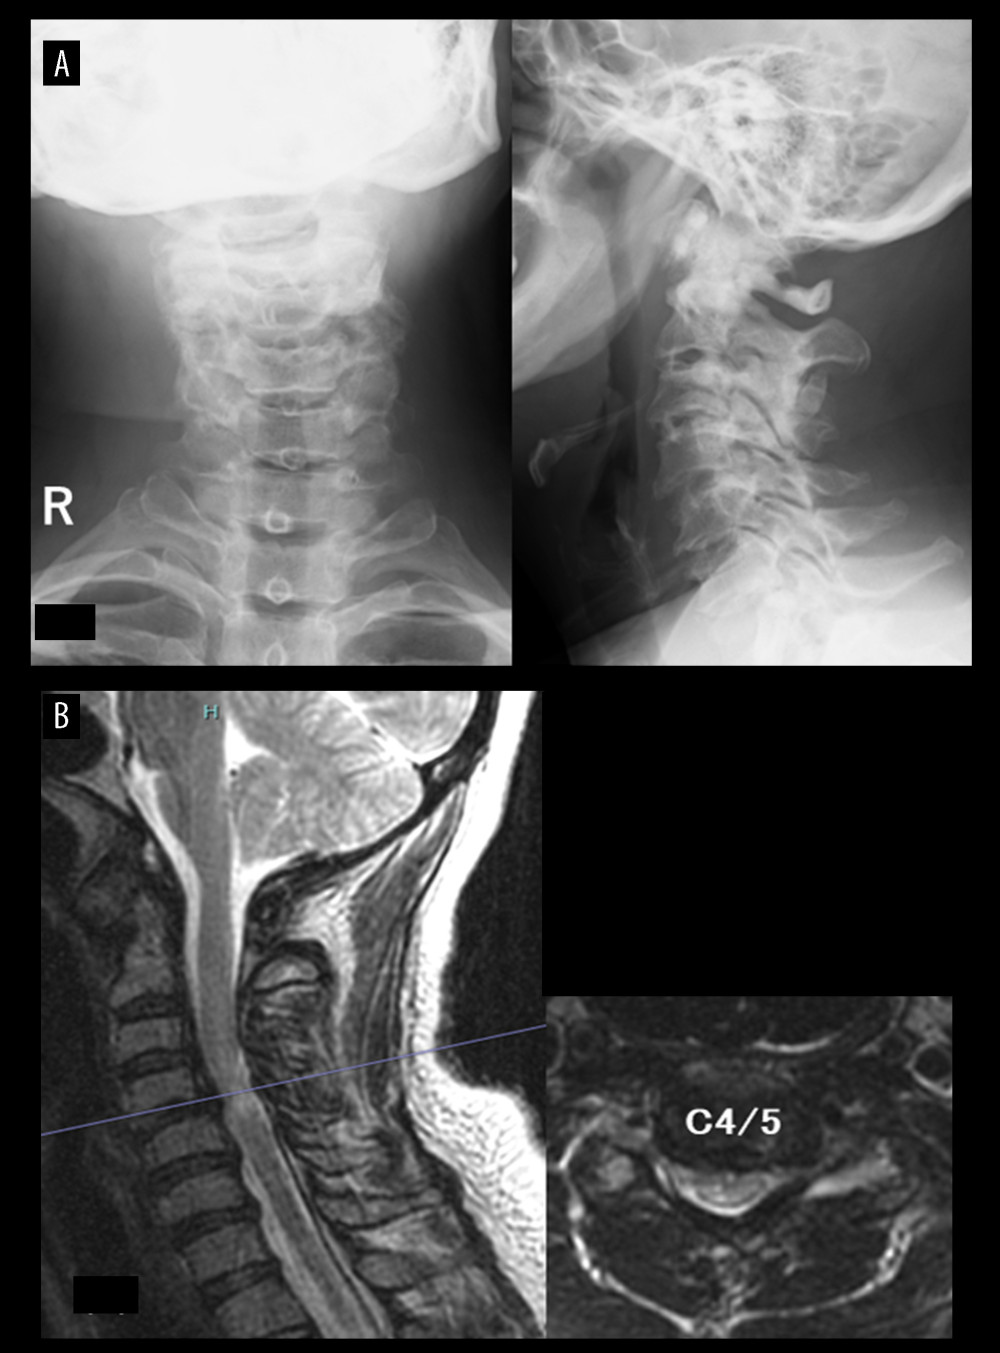 Case 1. A 39-year-old woman with athetoid and dystonic cerebral palsy associated with degenerative cervical spondylotic myelopathy (preoperative findings). (A) Radiography showed cervical deformity. (B) Magnetic resonance imaging showed C4/5 spinal cord signal changes, but the degree of stenosis was mild.